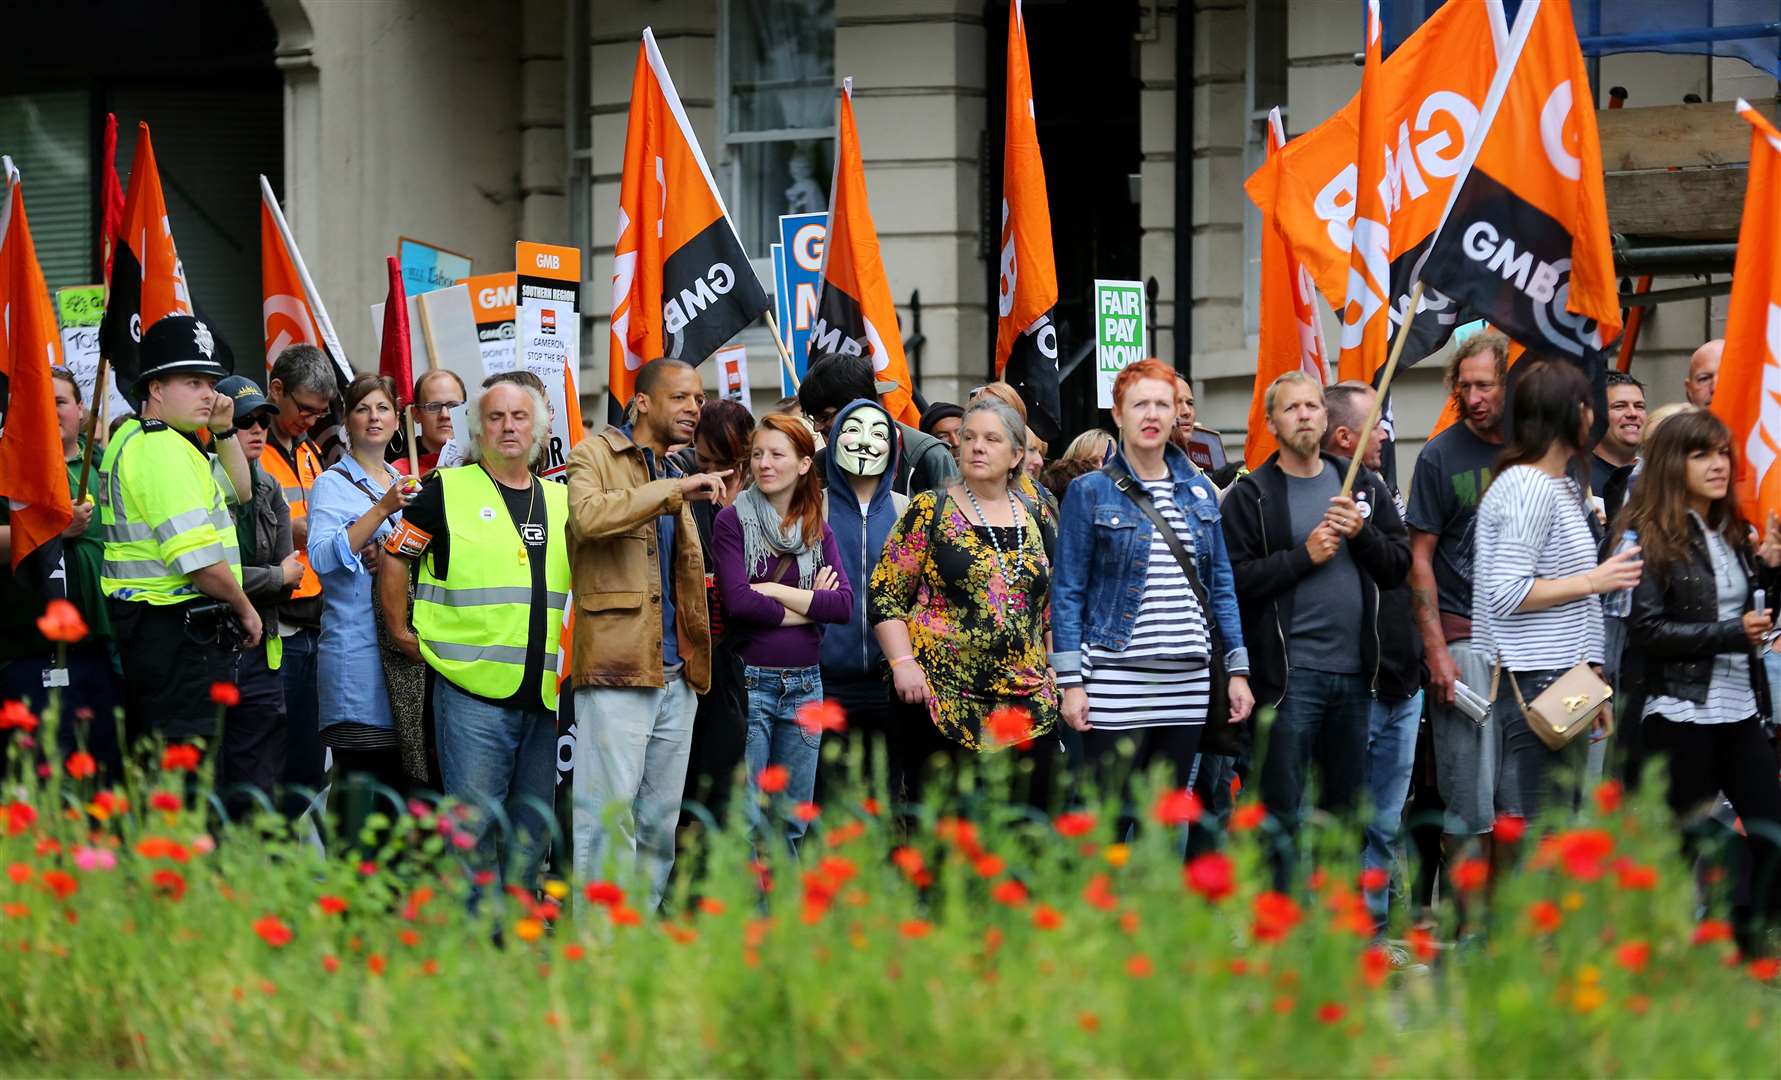 Public sector workers on strike (Gareth Fuller/PA)